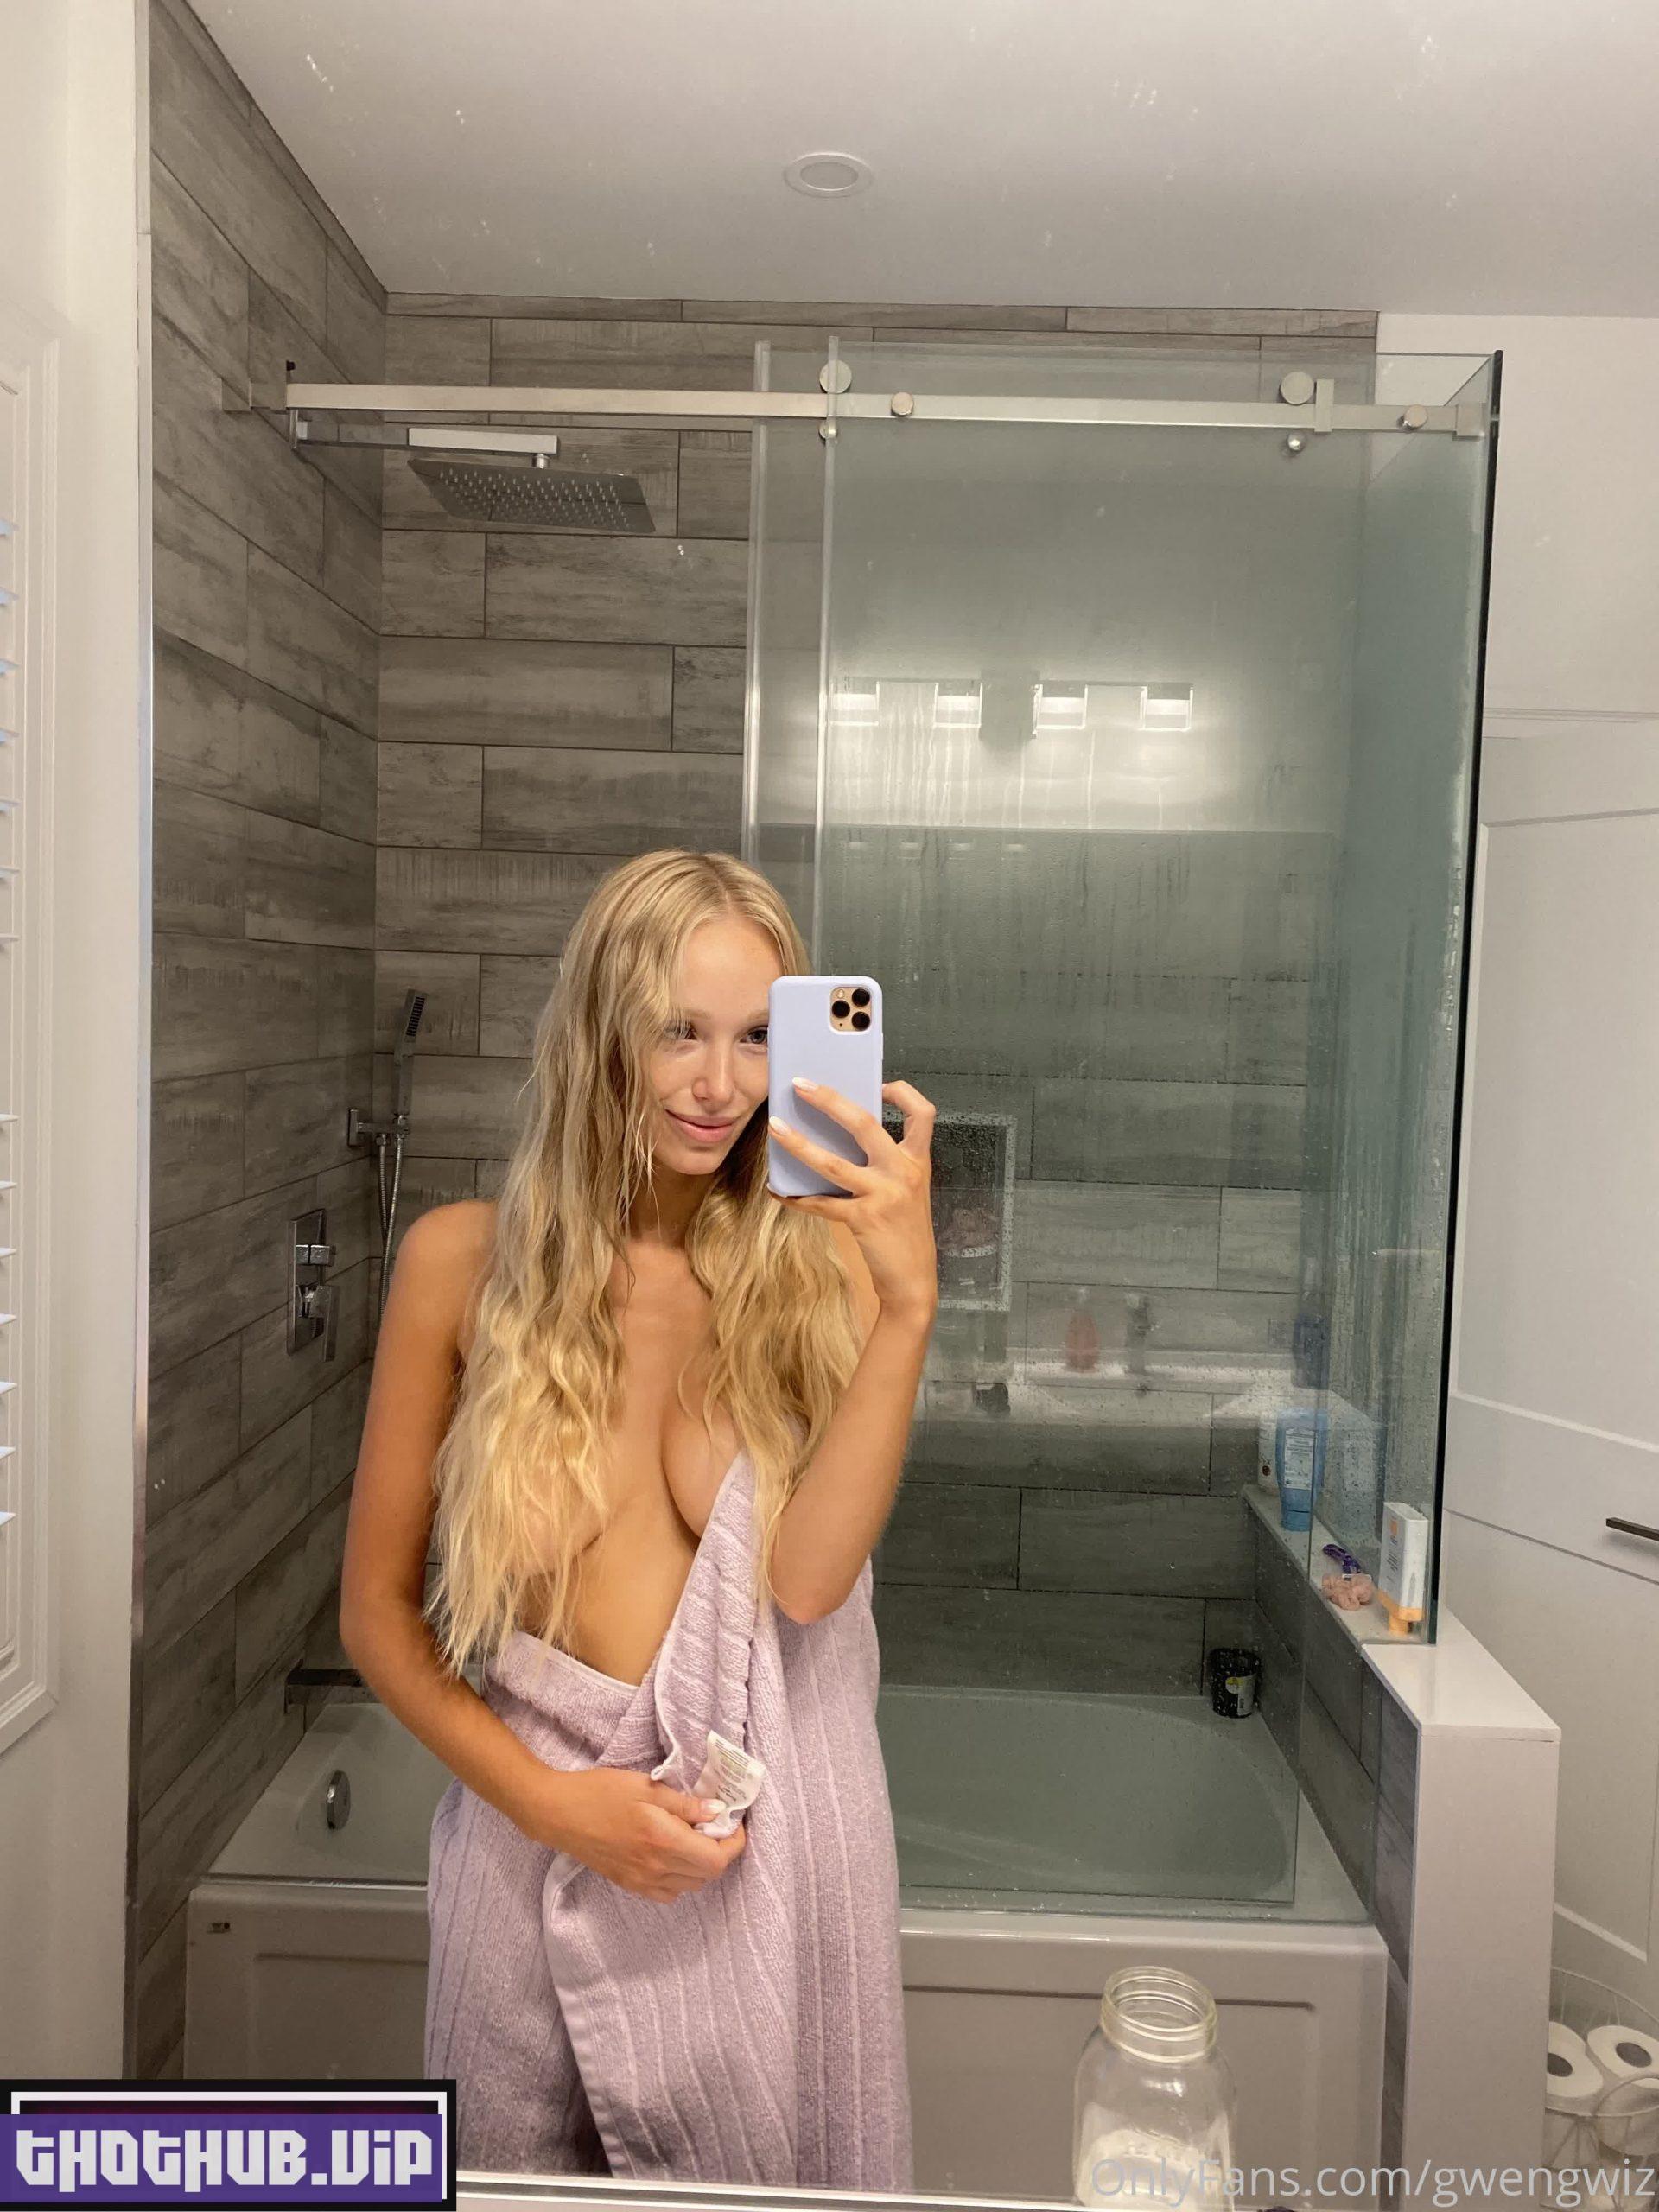 1689069333 135 Gwengwiz %E2%80%93 Busty Blonde Onlyfans Sextapes Nudes